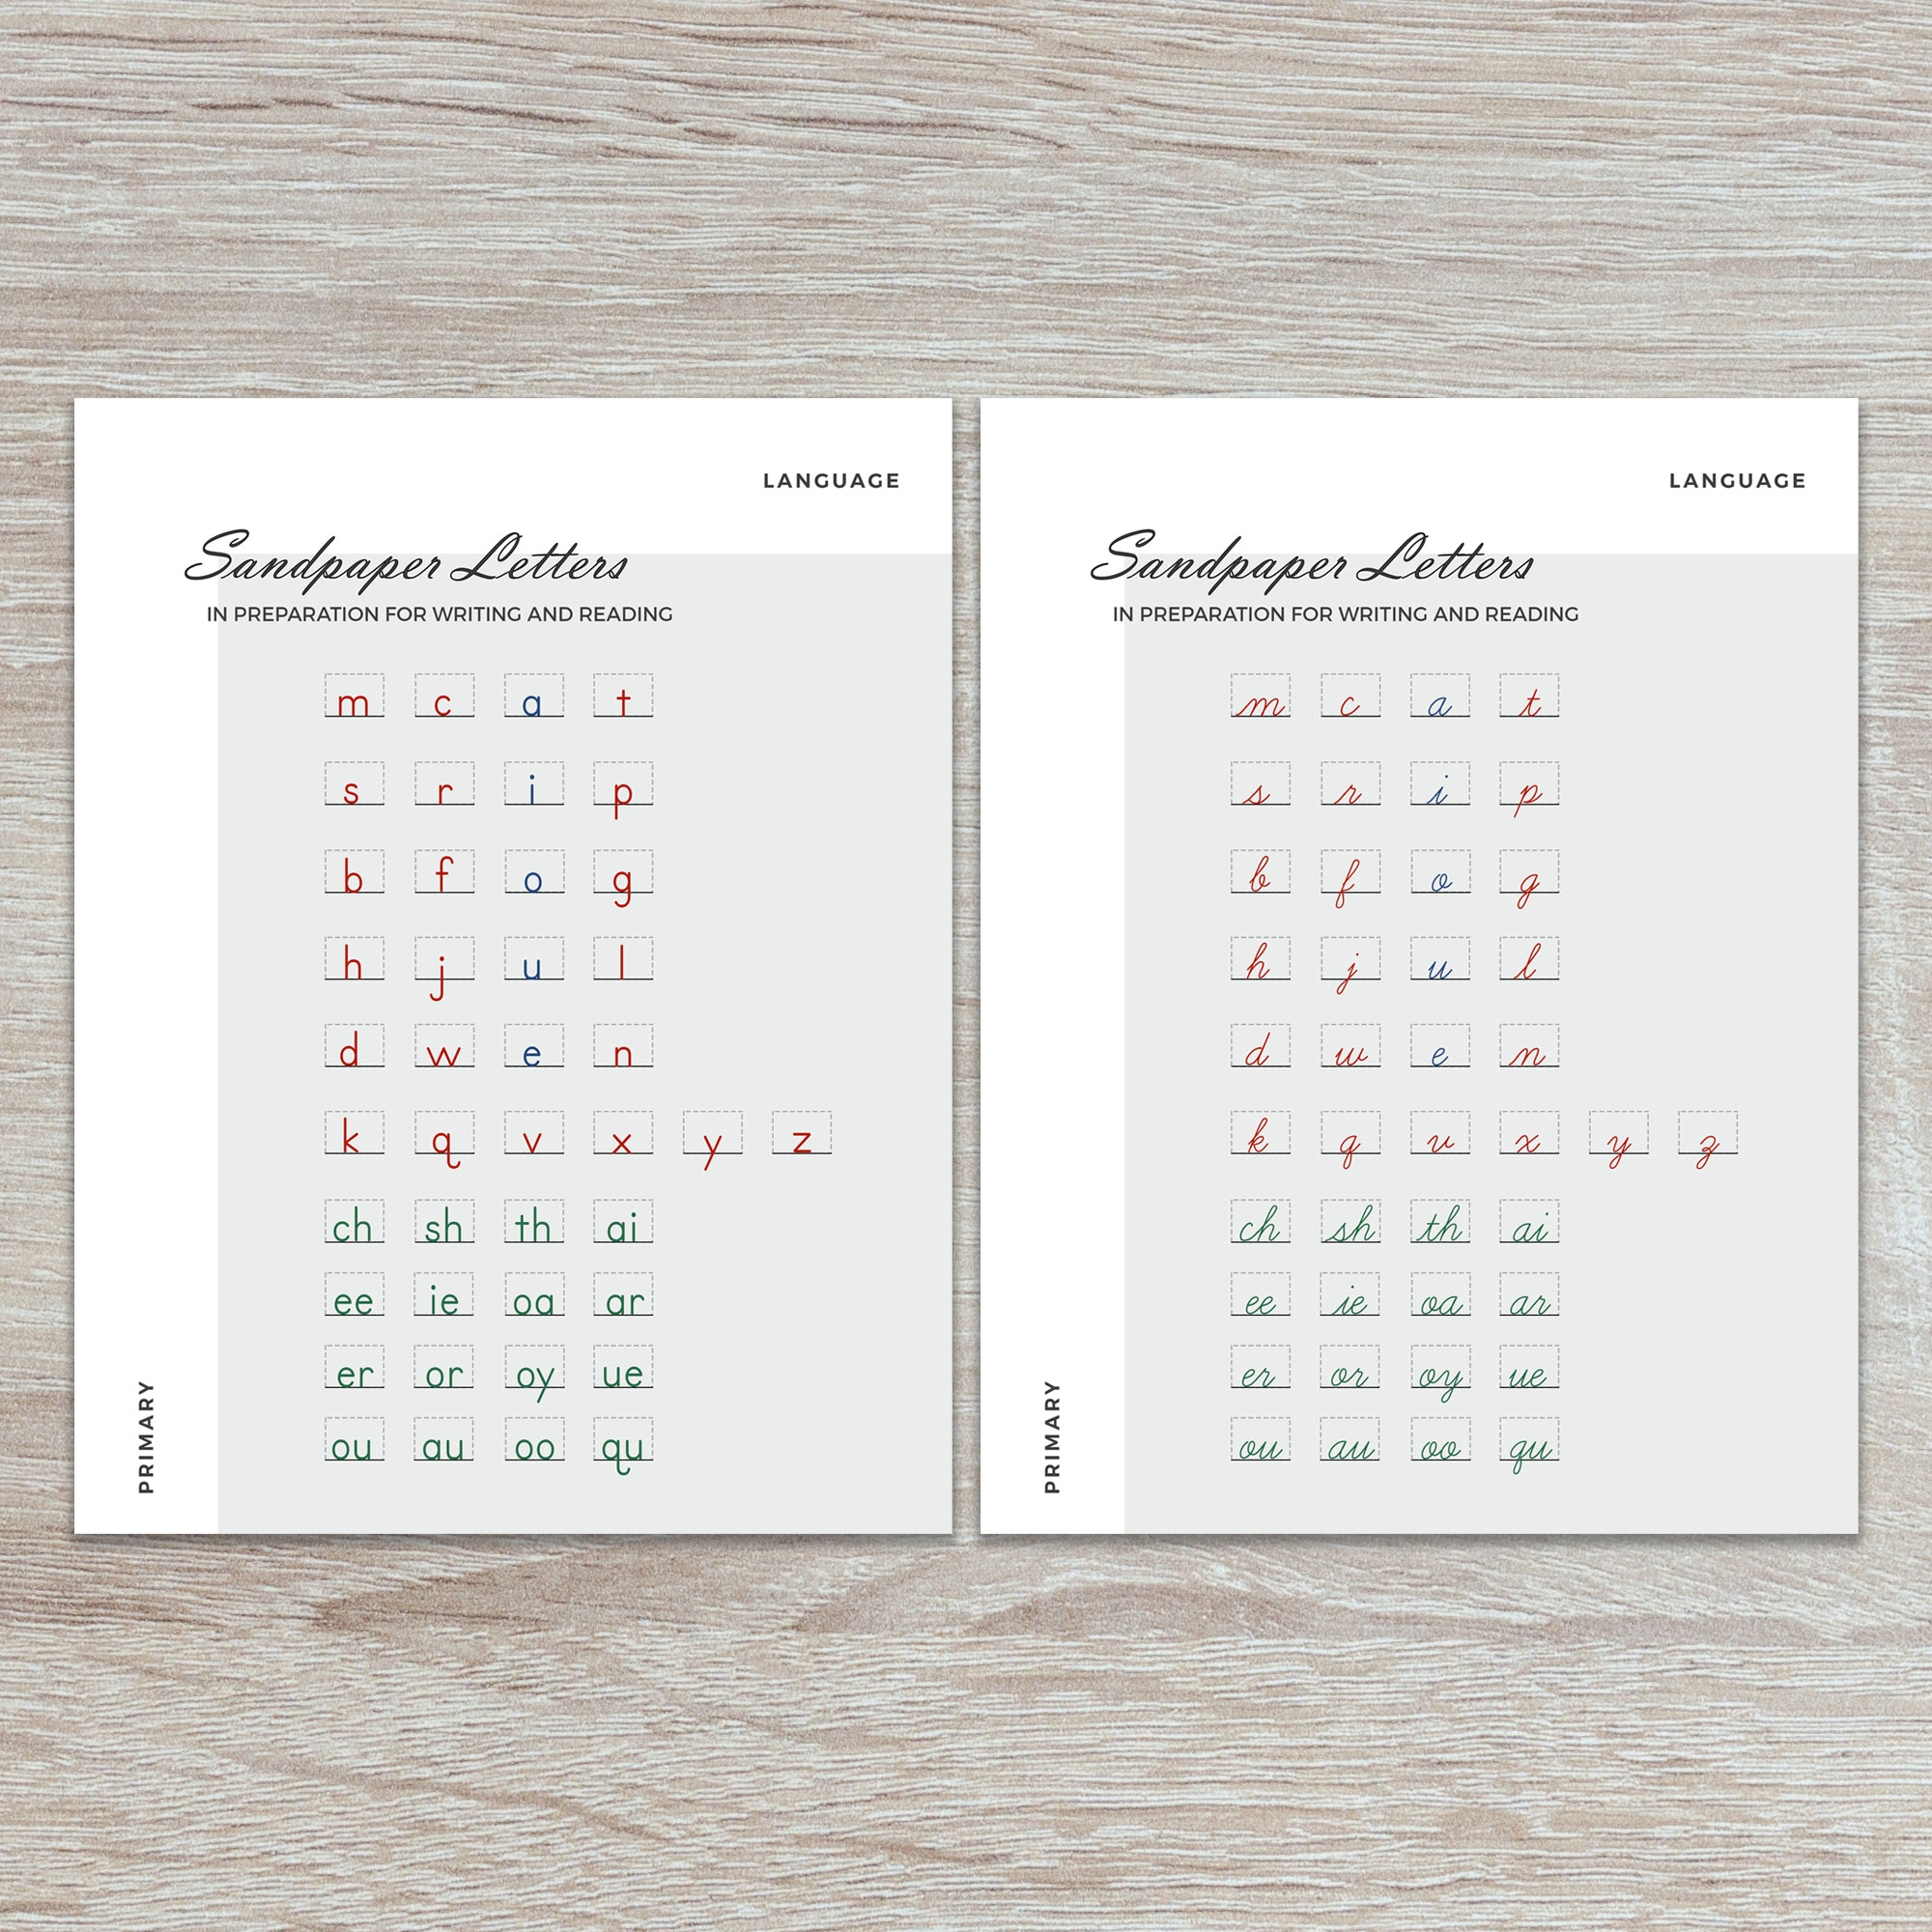 Introducing Sandpaper Letters A Free Progress Sheet To Simplify Homeschooling Free And Unfettered